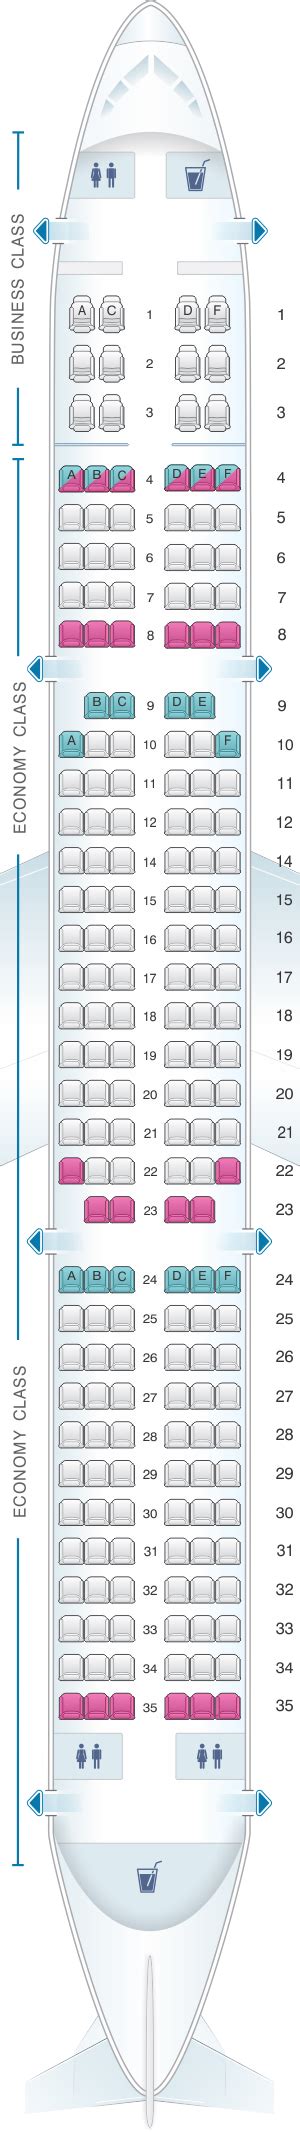 Seat Map And Seating Chart Airbus A Avianca Seating Charts Sexiz Pix